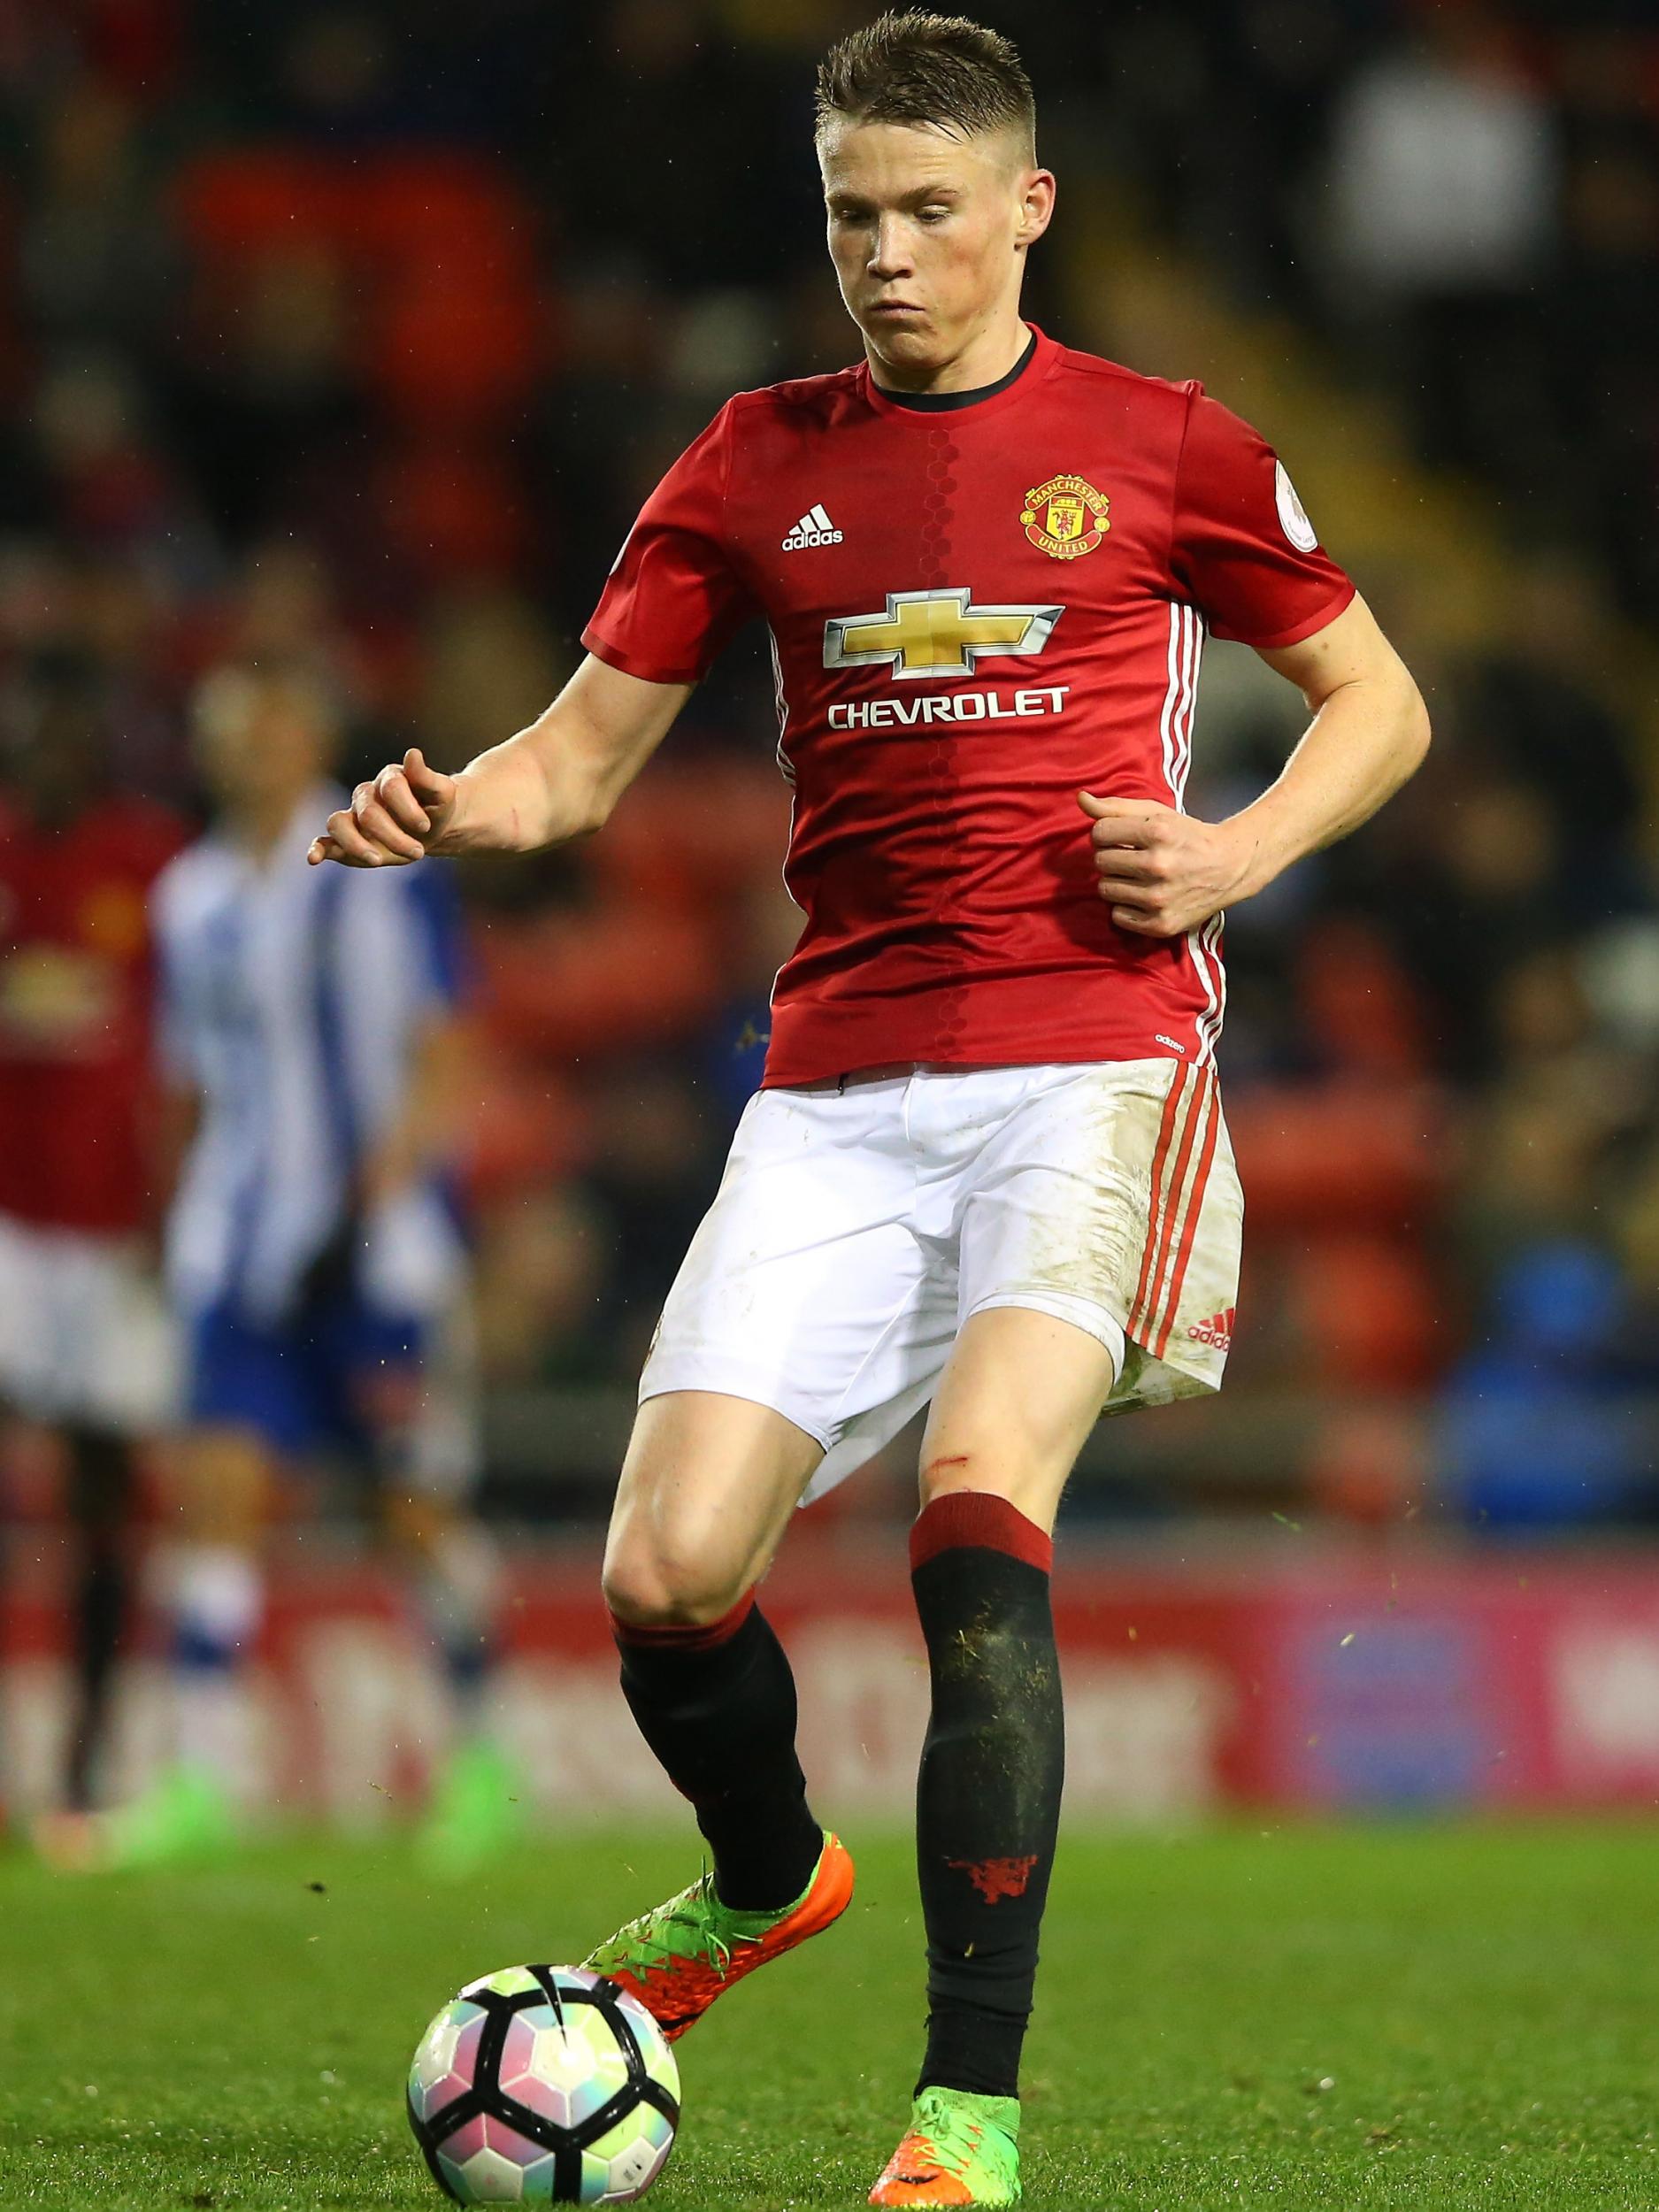 McTominay is a powerful central midfielder